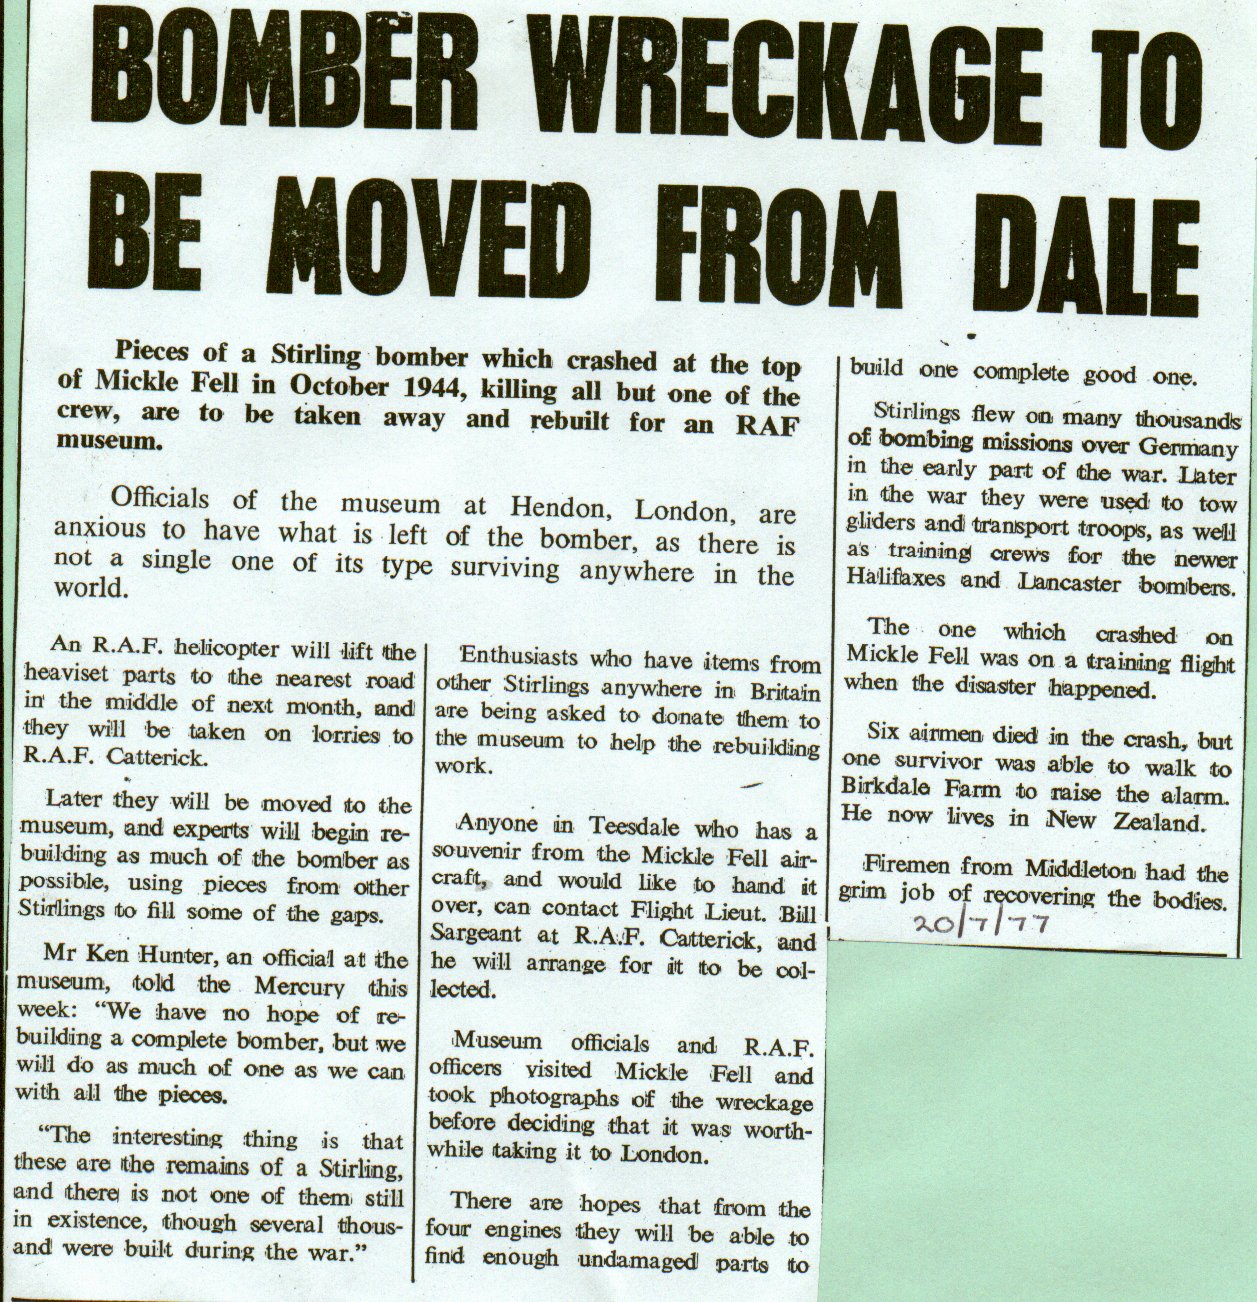  Bomber wreckage to be moved from dale

Mickle Fell, history, aircraft crash 